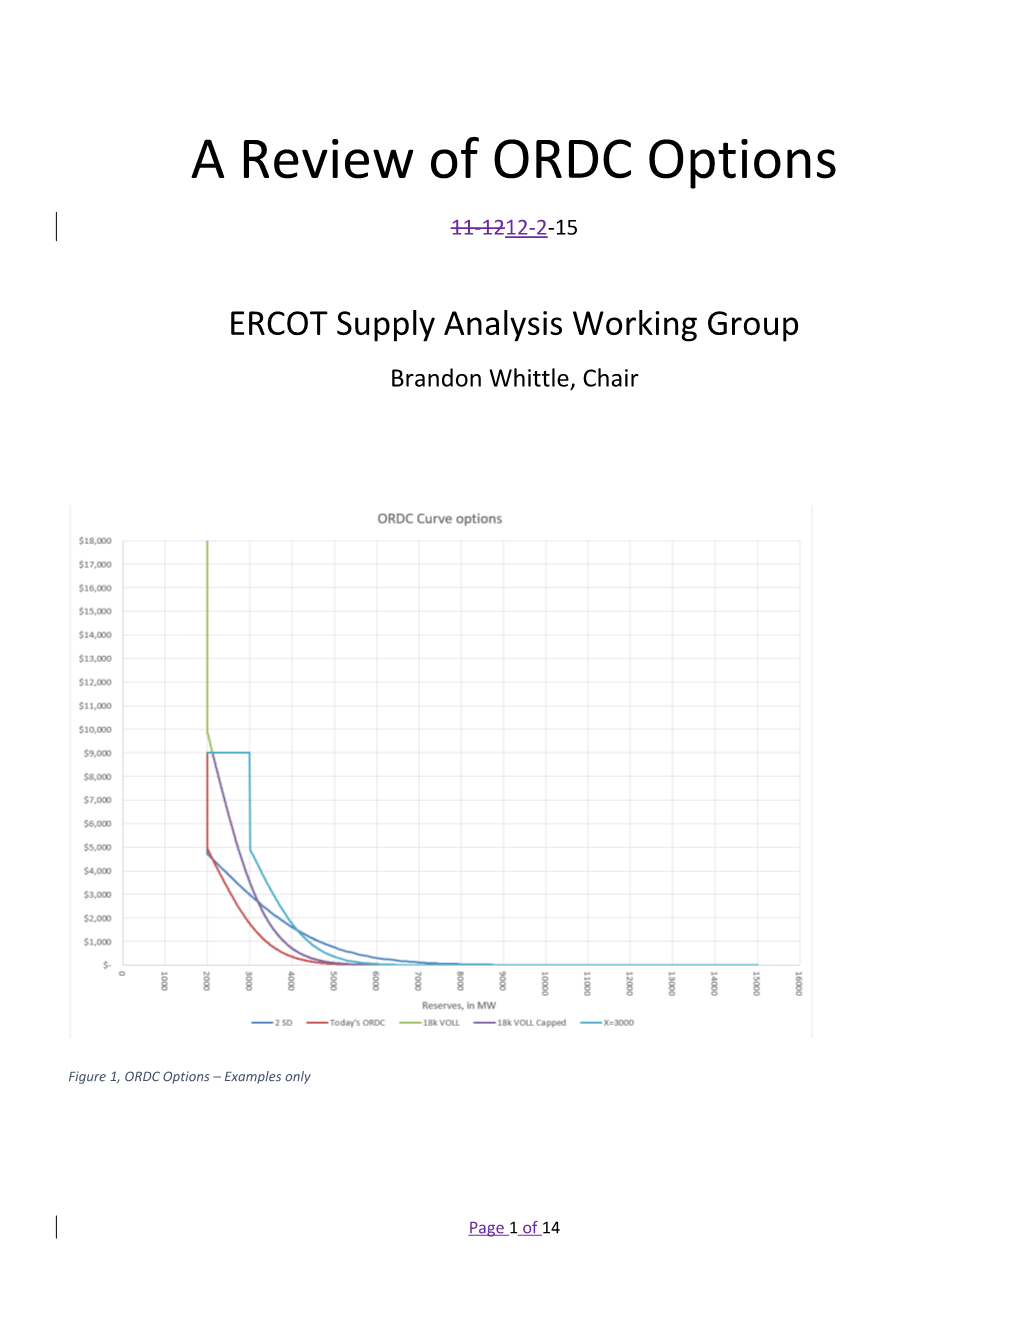 ERCOT Supply Analysis Working Group